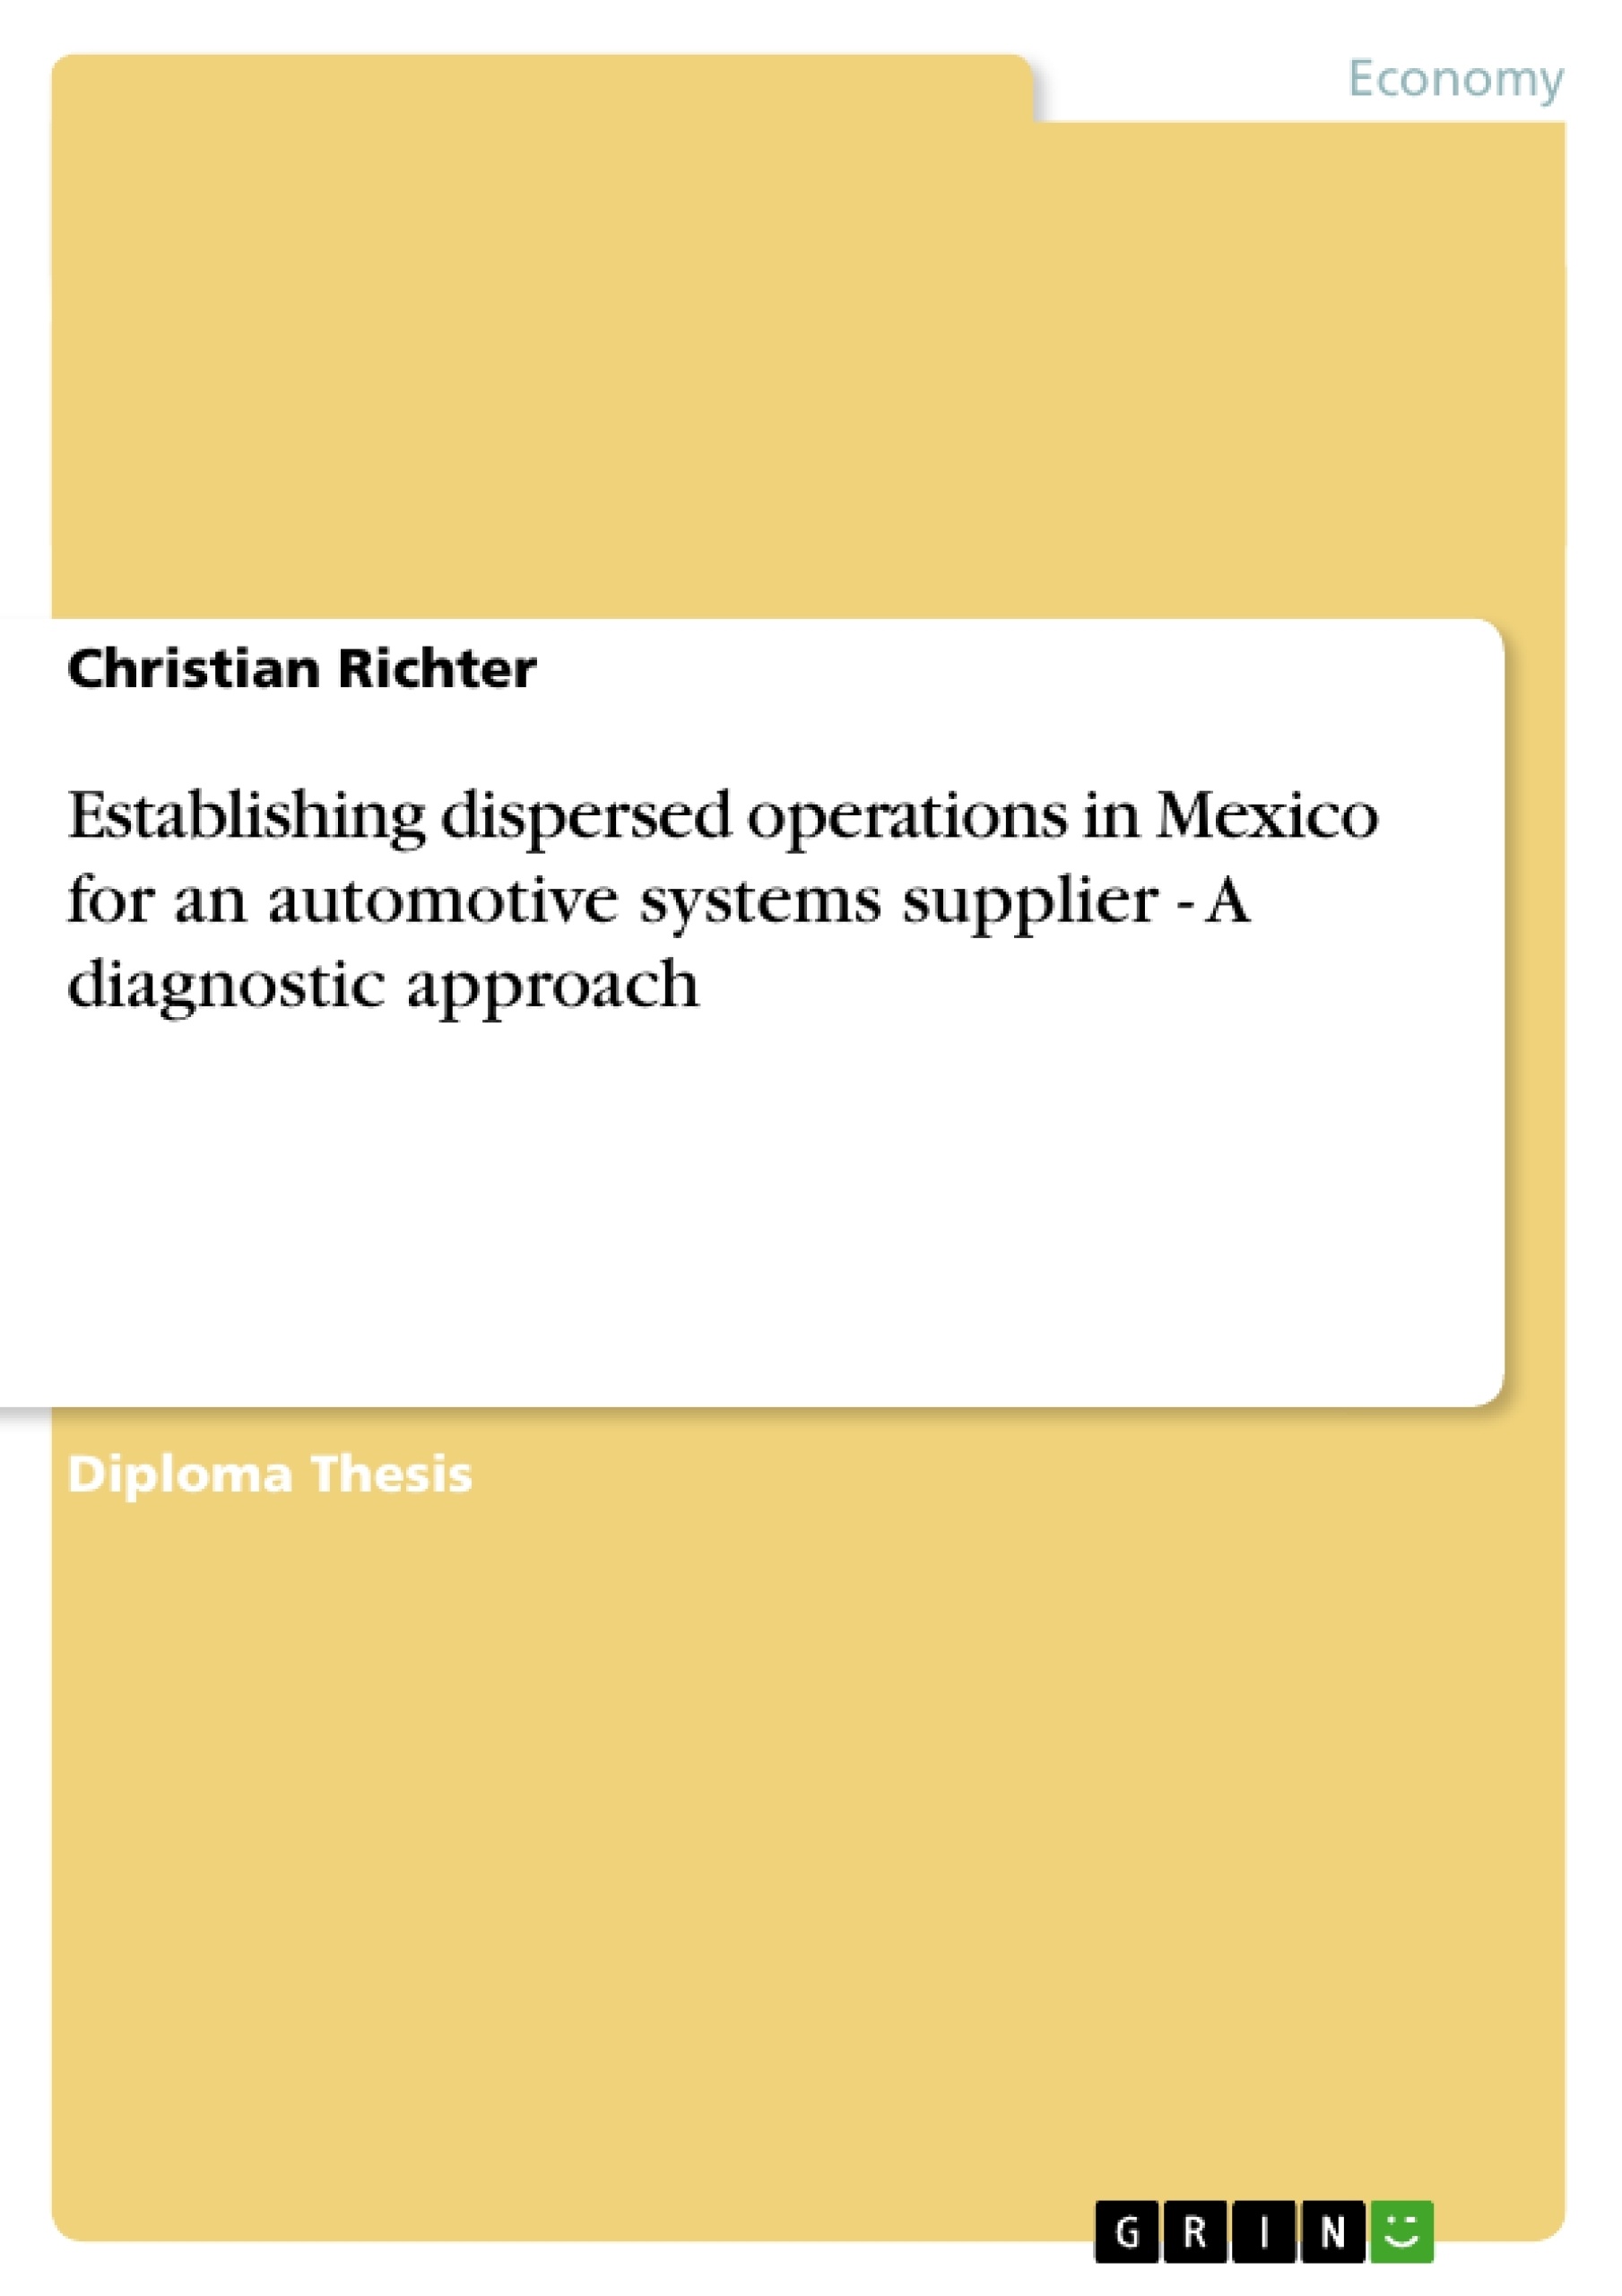 Title: Establishing dispersed operations in Mexico for an automotive systems supplier - A diagnostic approach